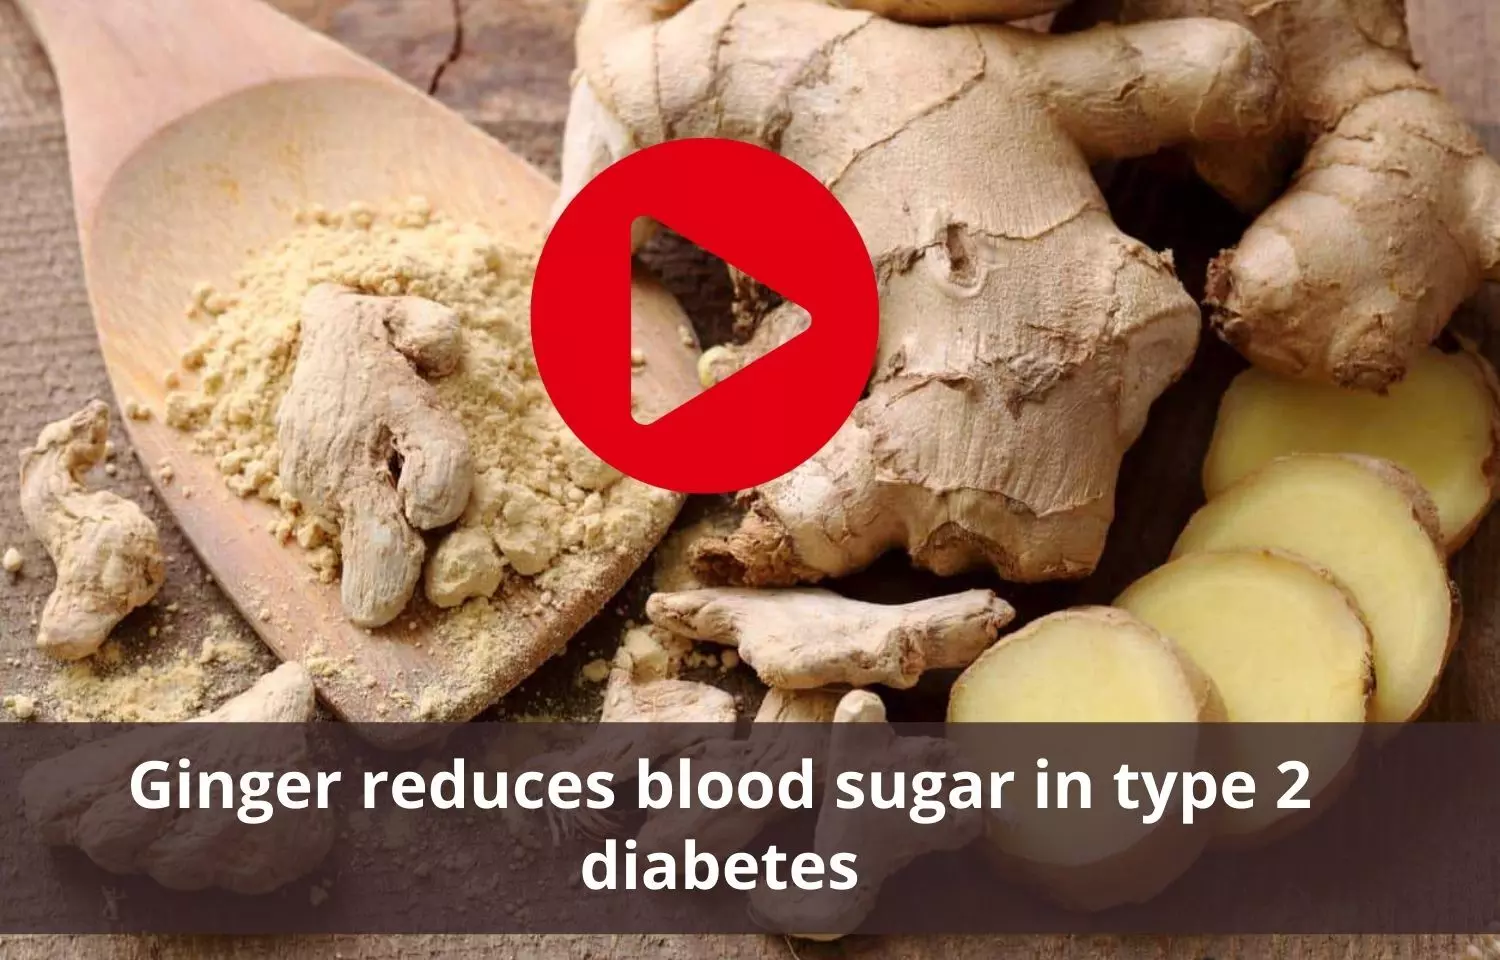 Ginger to be effective in maintaining blood sugar levels